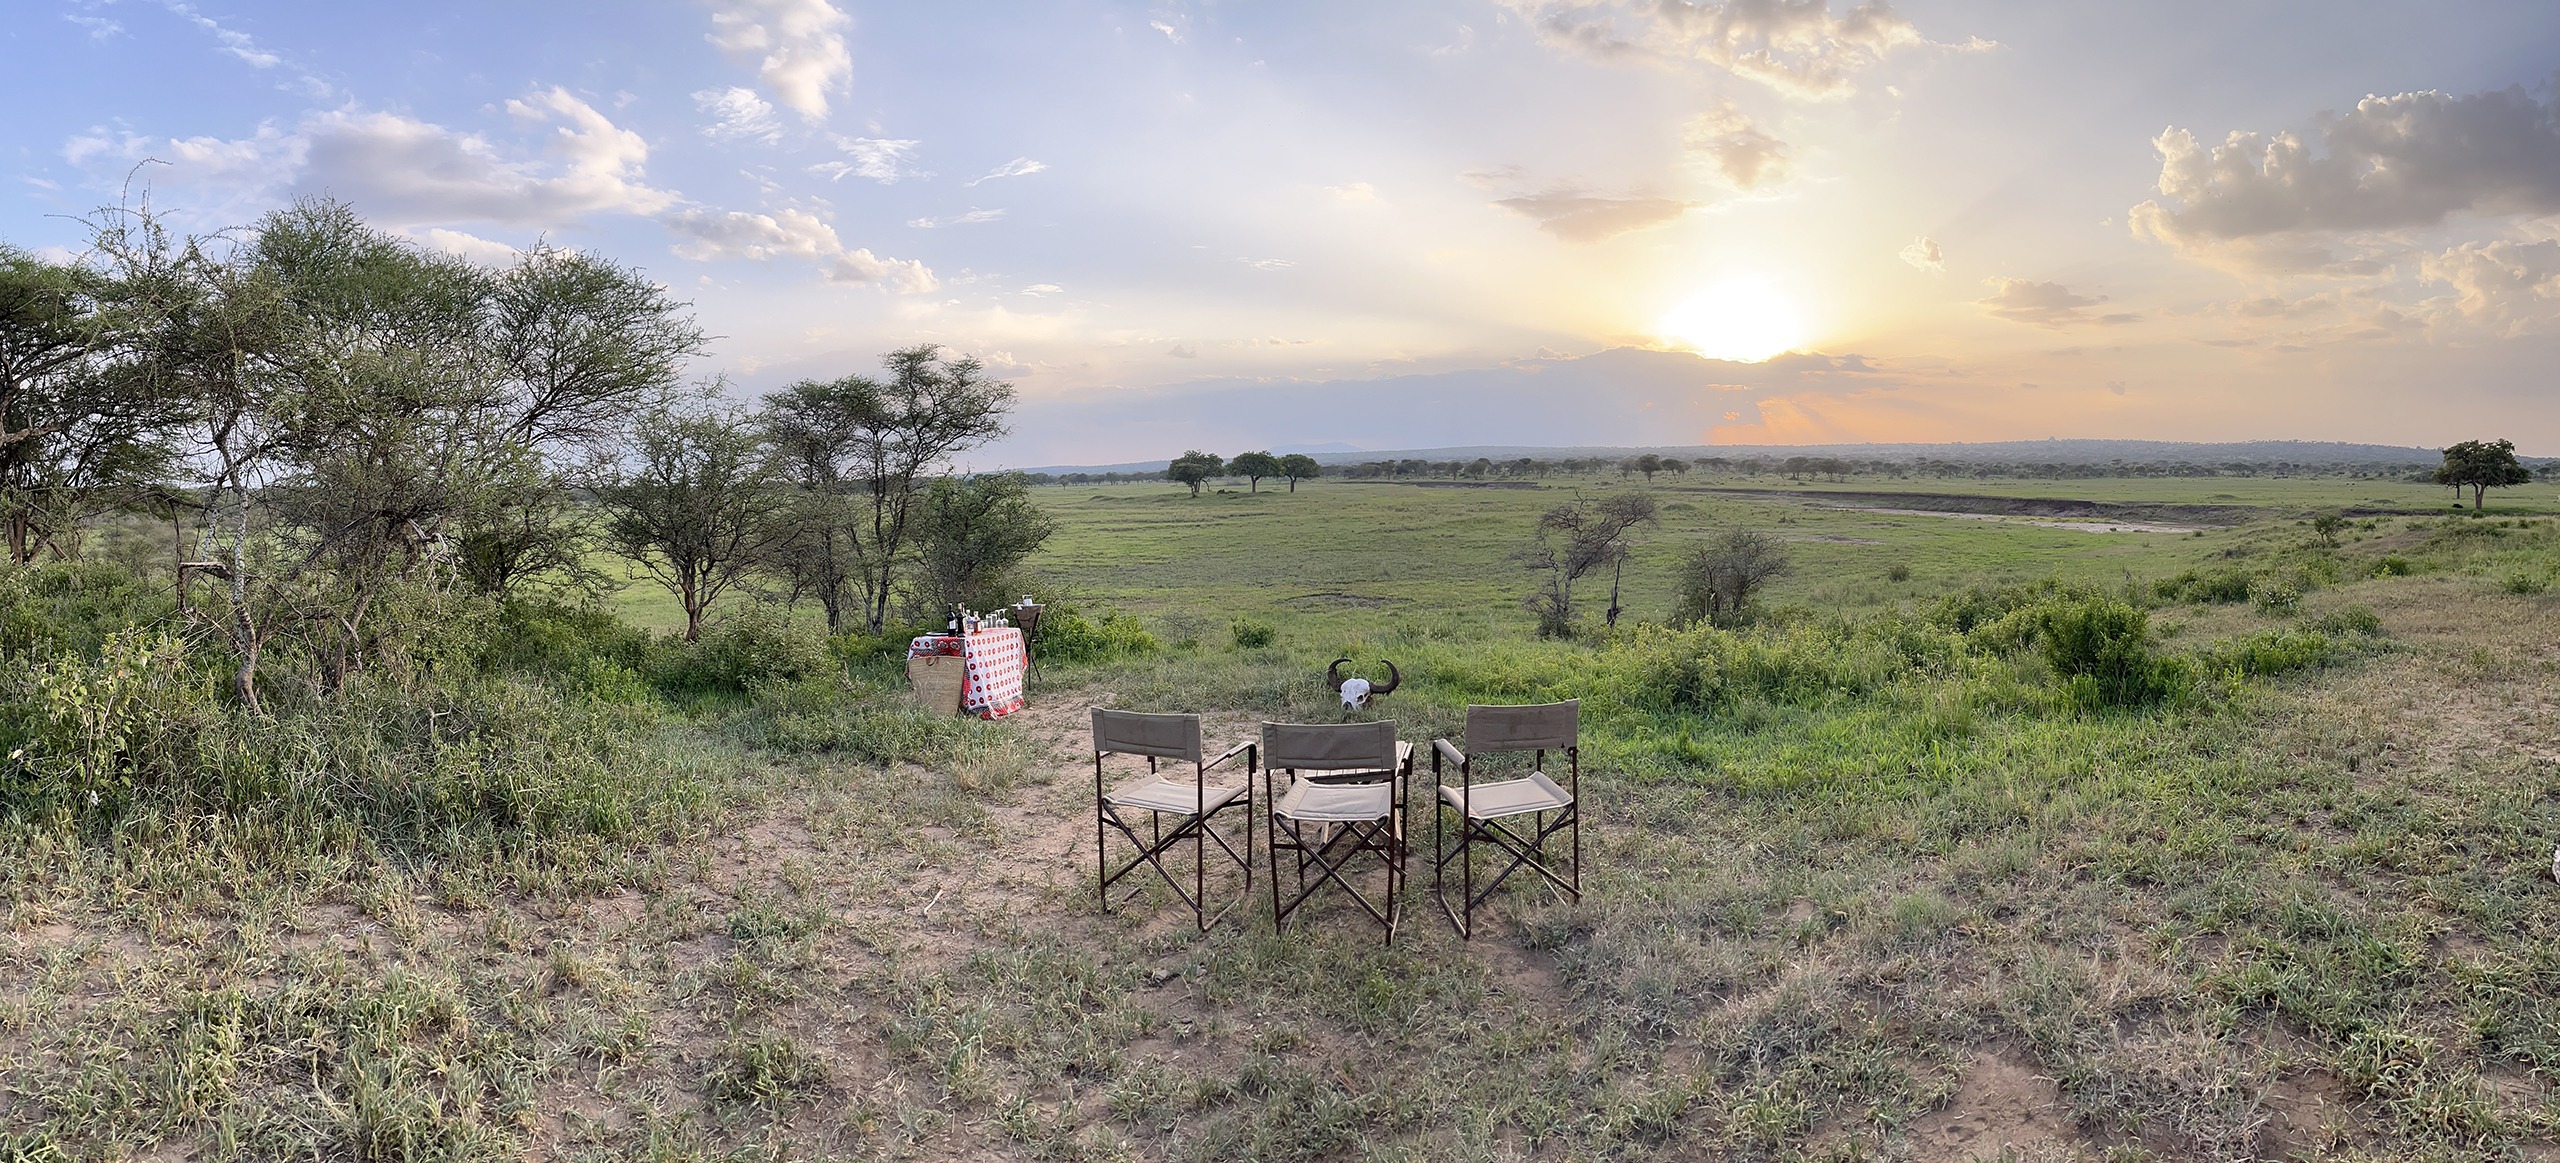 Contact | Header Picture | 3 chairs in the wide landscape of the Serengeti at sunrise | Navel of Africa | Safari Tours | www.navelofafrica.com